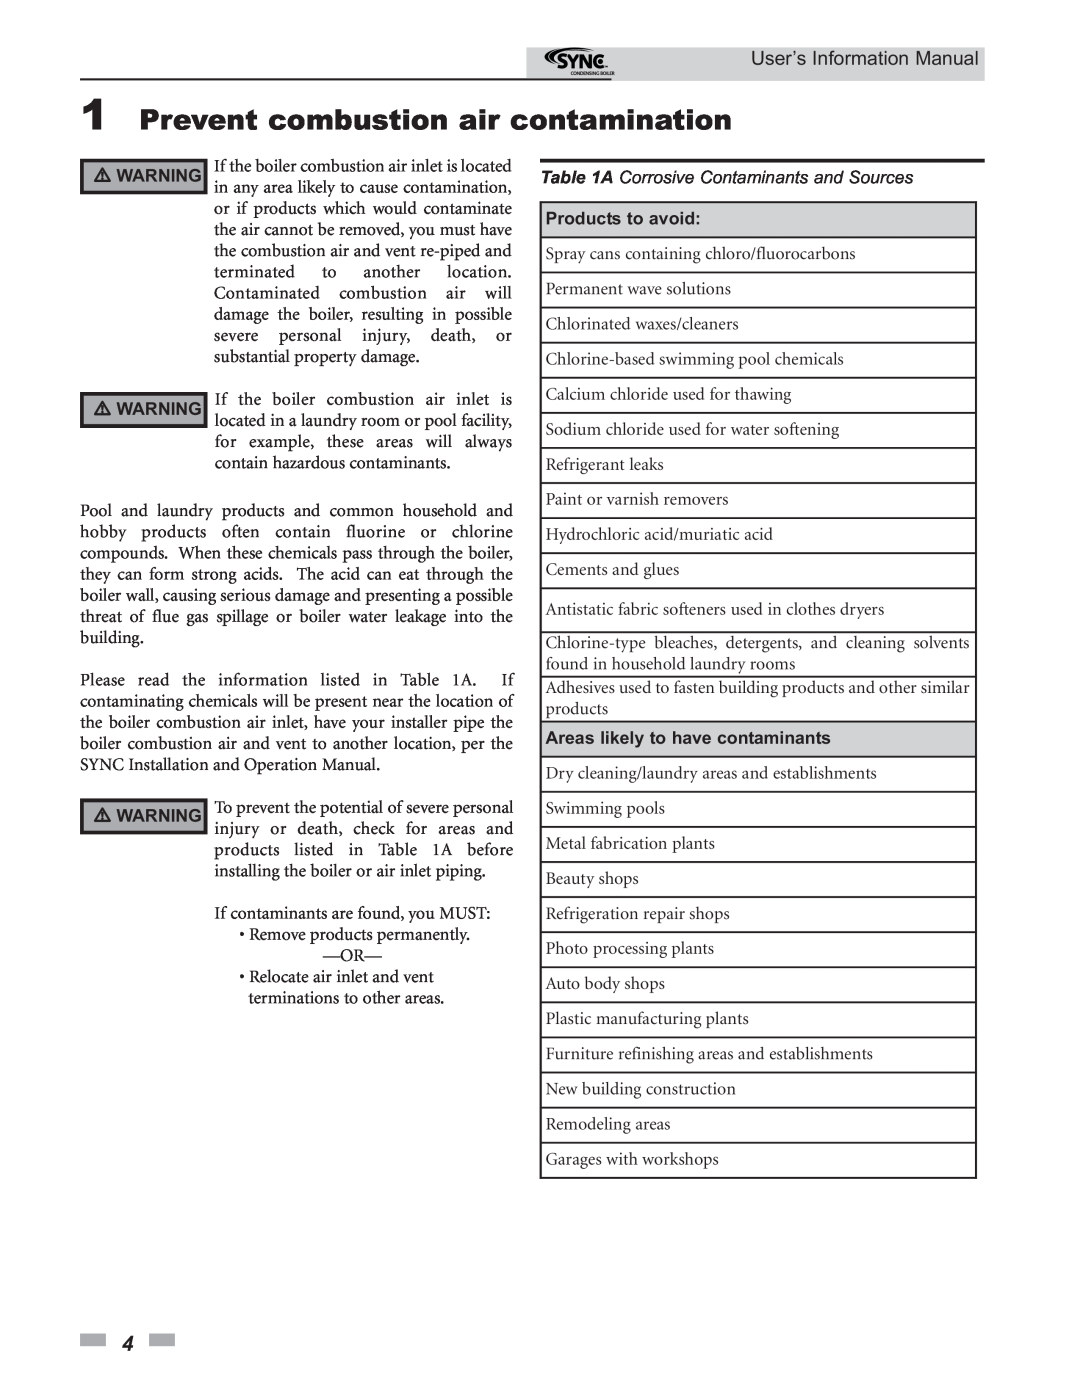 Lochinvar 1.3, 1.5 1Prevent combustion air contamination, User’s Information Manual, A Corrosive Contaminants and Sources 